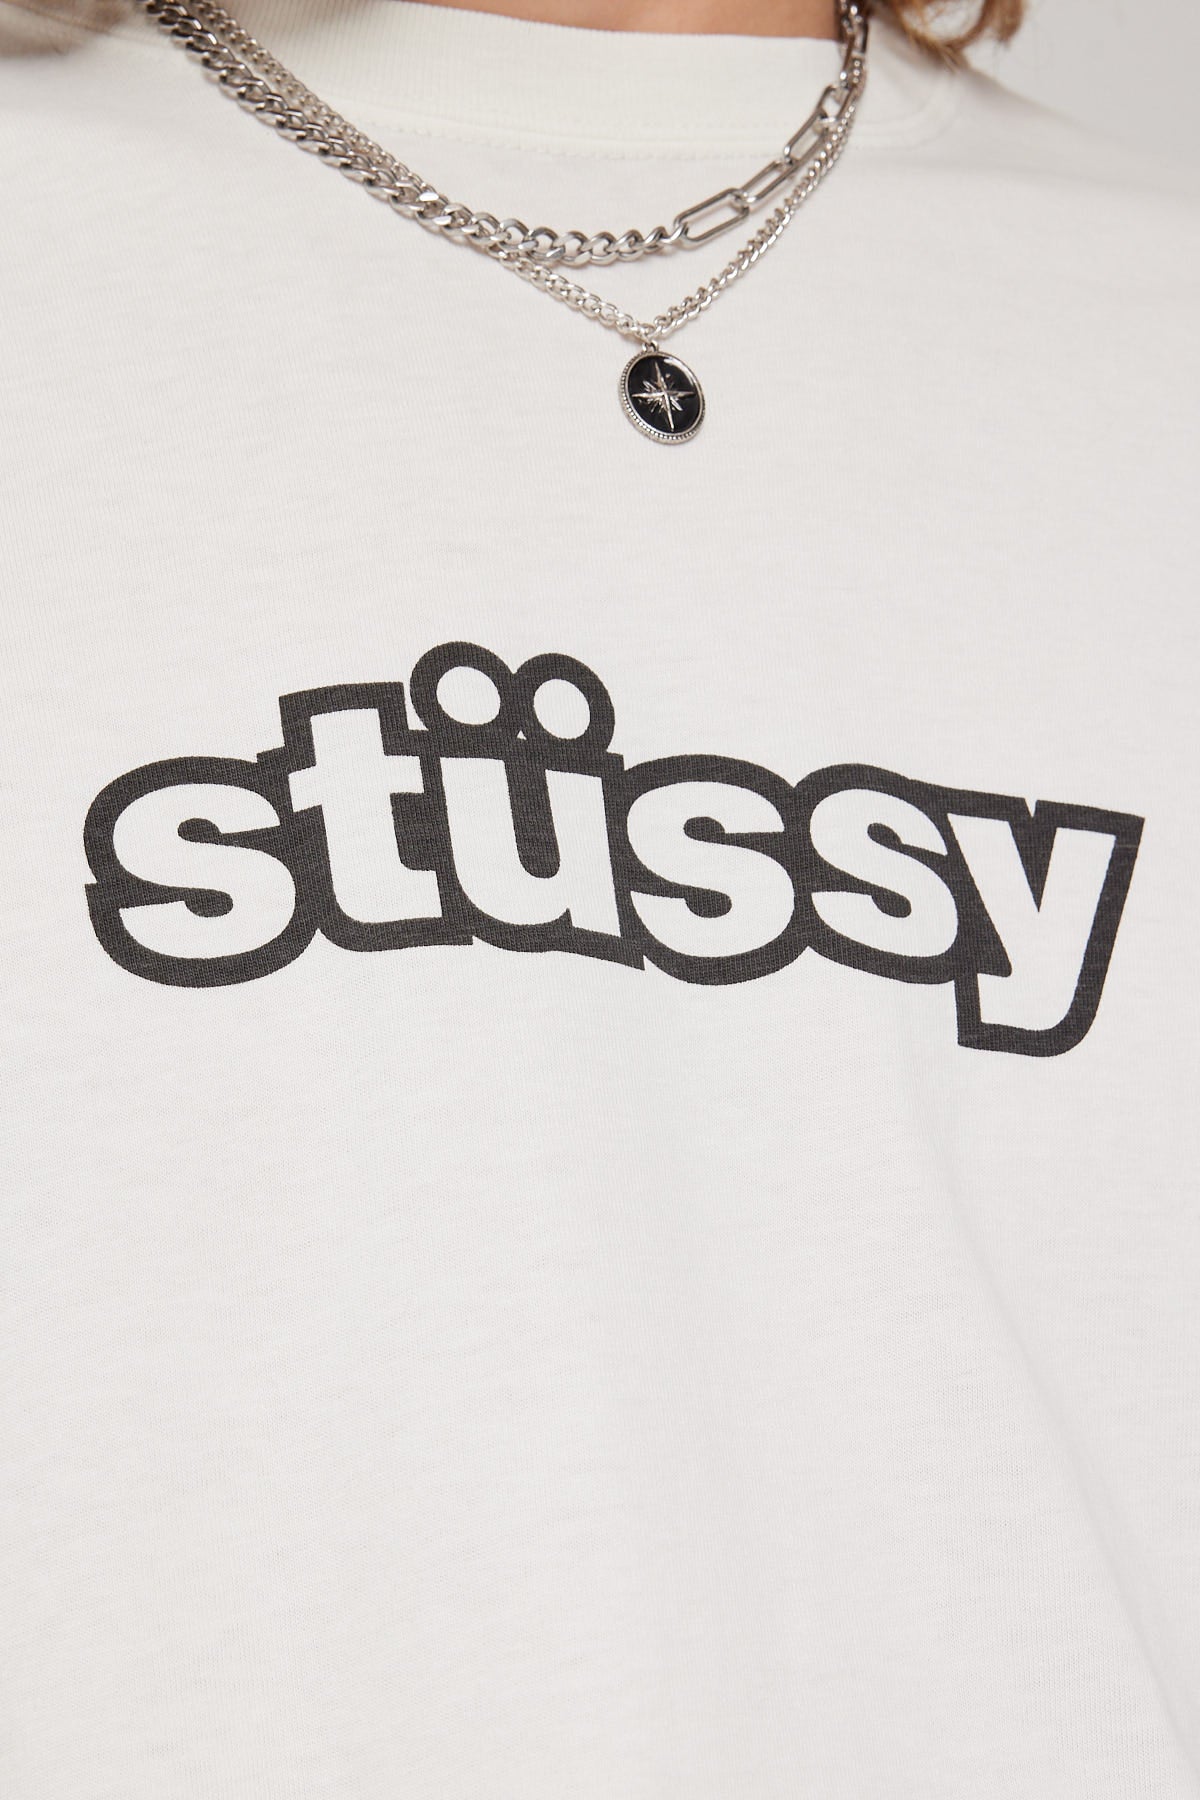 Stussy Thick 50-50 Pigment Short Sleeve Tee Pigment Washed White